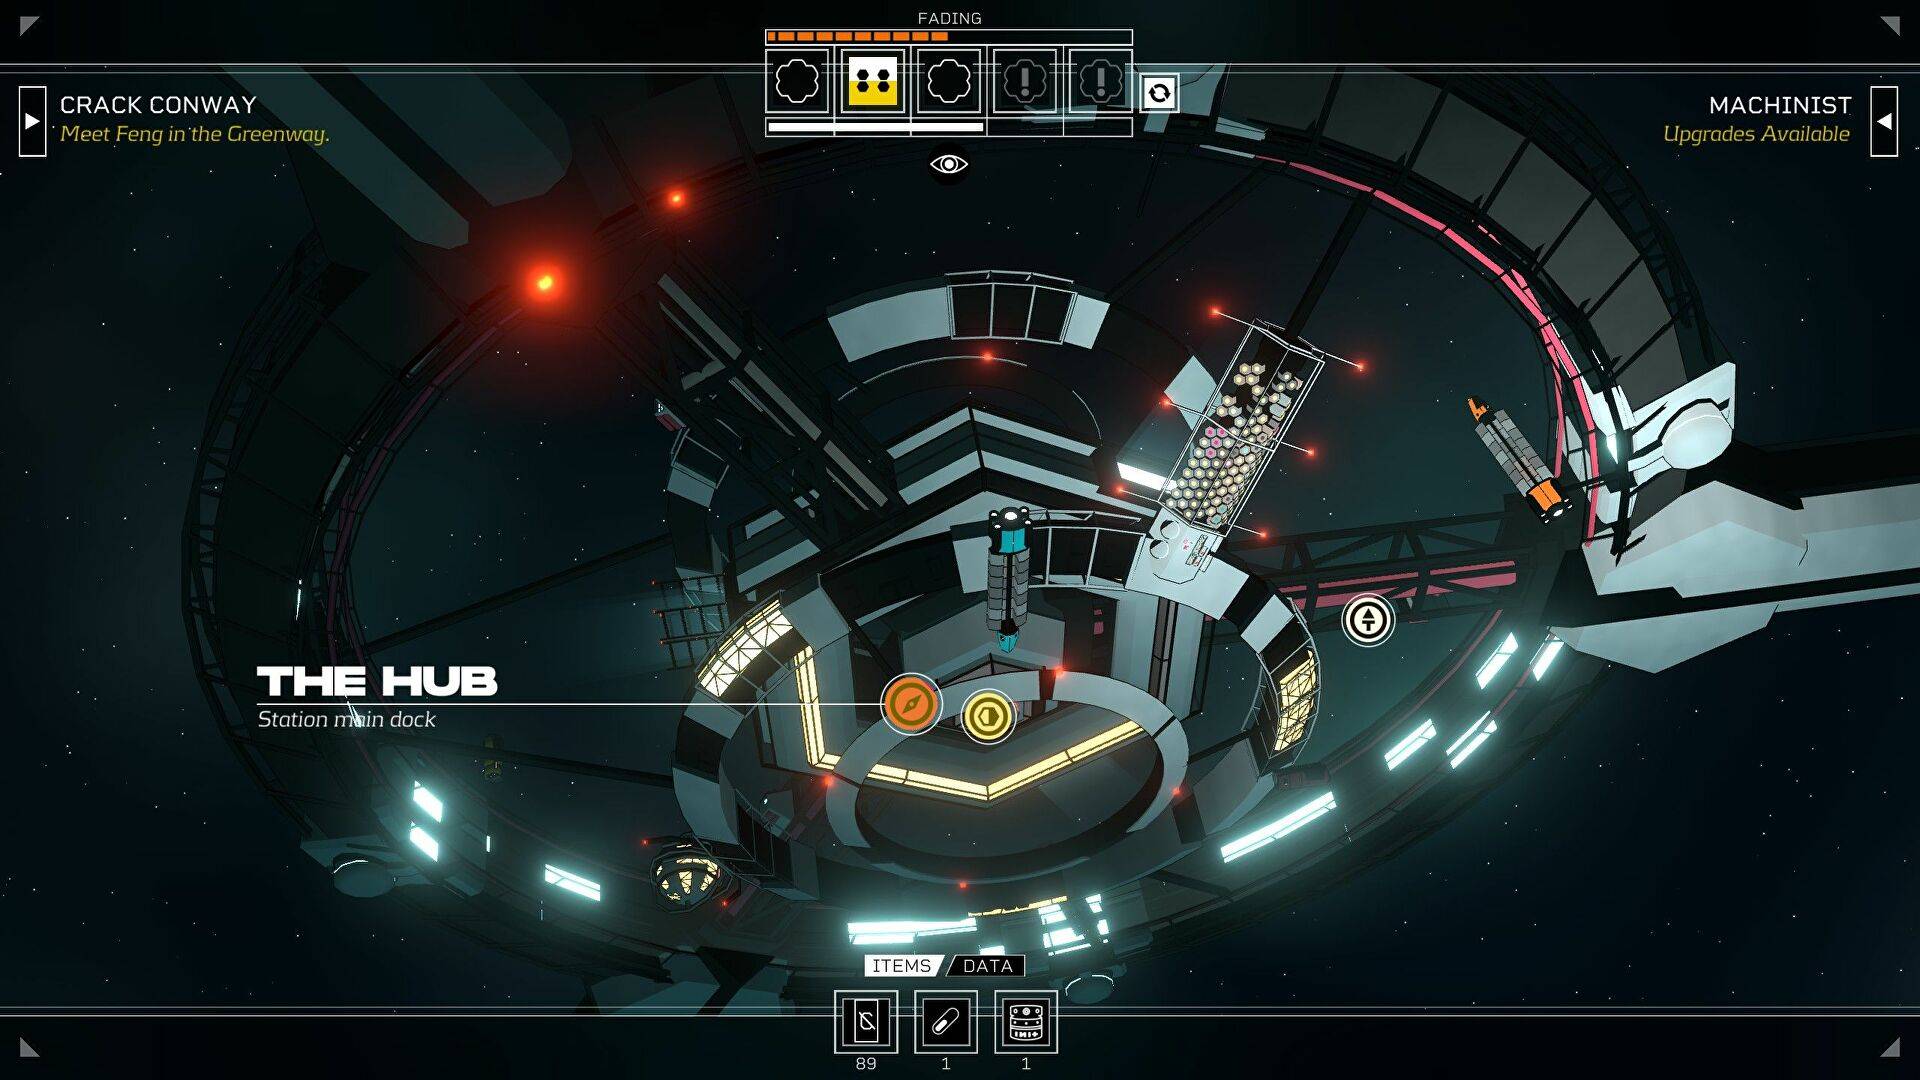 best upcoming switch games: a space station is shown